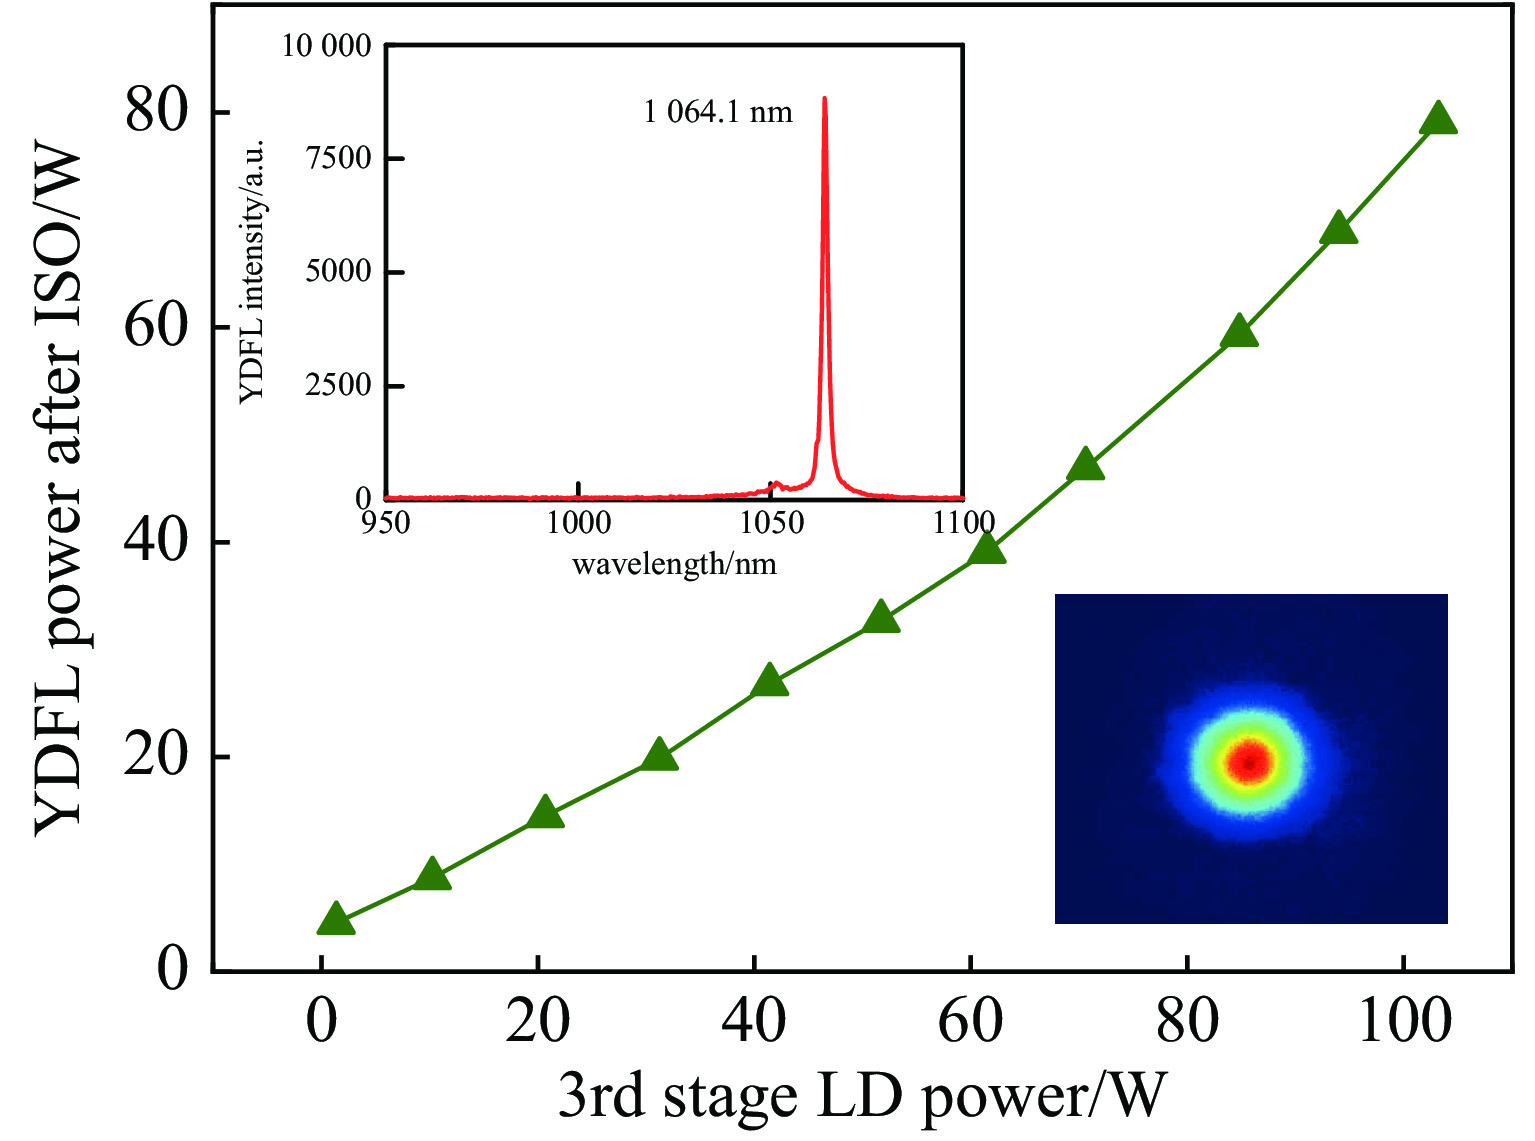 YDFL power after ISO versus third stage LD power with insets show spectrum and beam profile